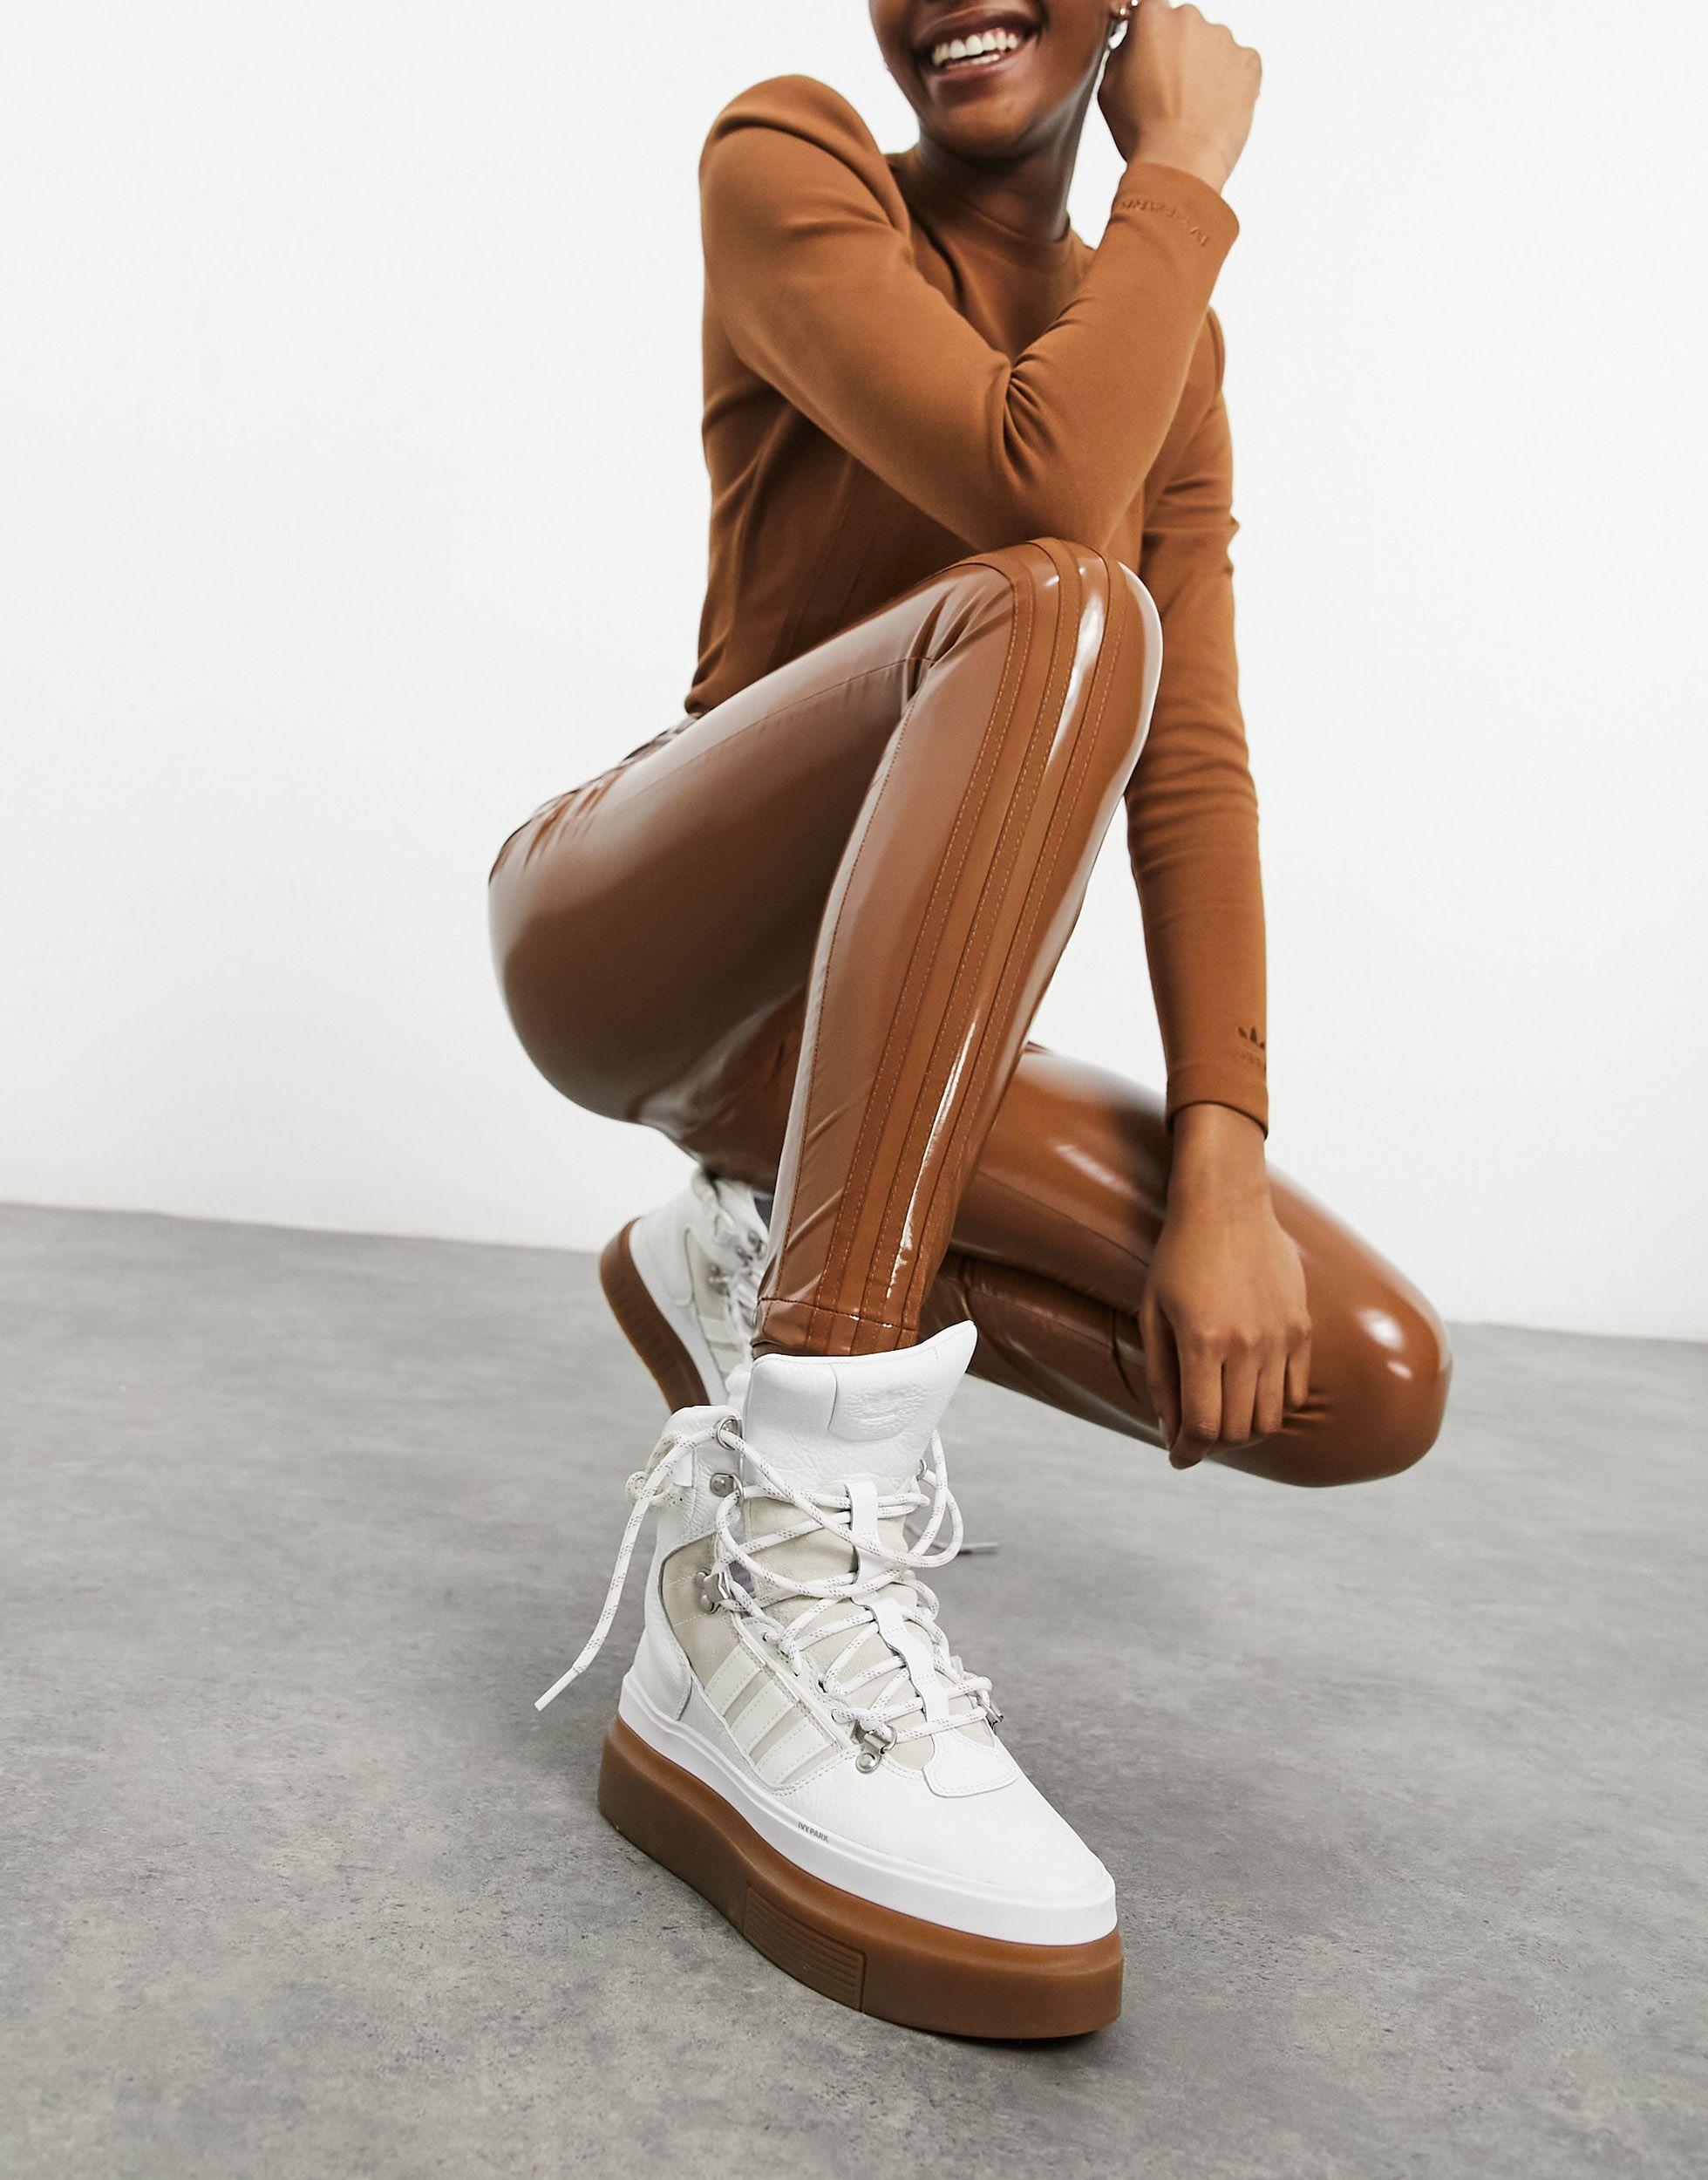 Ivy Park Adidas X Latex Trousers in Brown | Lyst